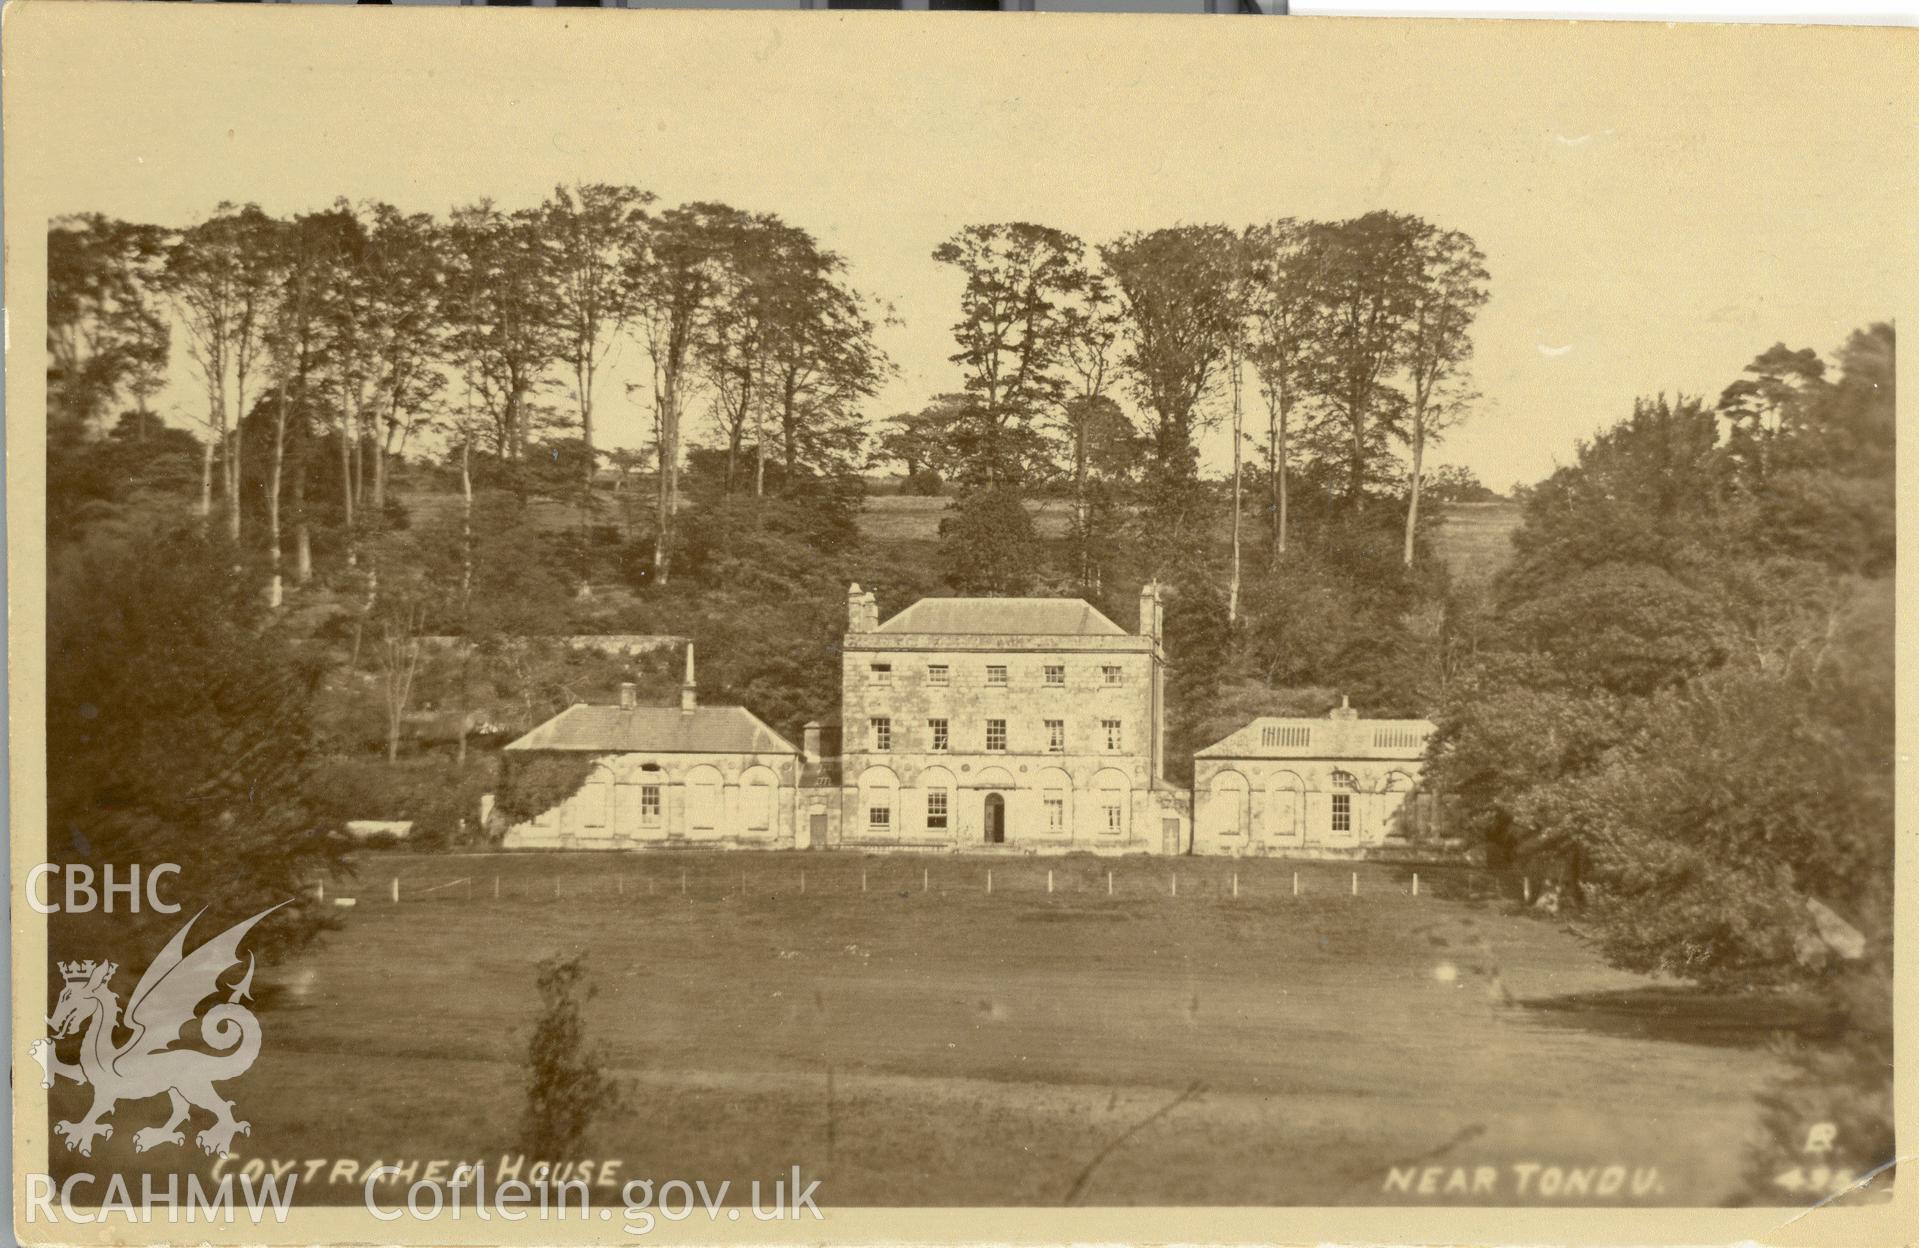 Digitised postcard image of Coytrahen House, Tondu. Produced by Parks and Gardens Data Services, from an original item in the Peter Davis Collection at Parks and Gardens UK. We hold only web-resolution images of this collection, suitable for viewing on screen and for research purposes only. We do not hold the original images, or publication quality scans.